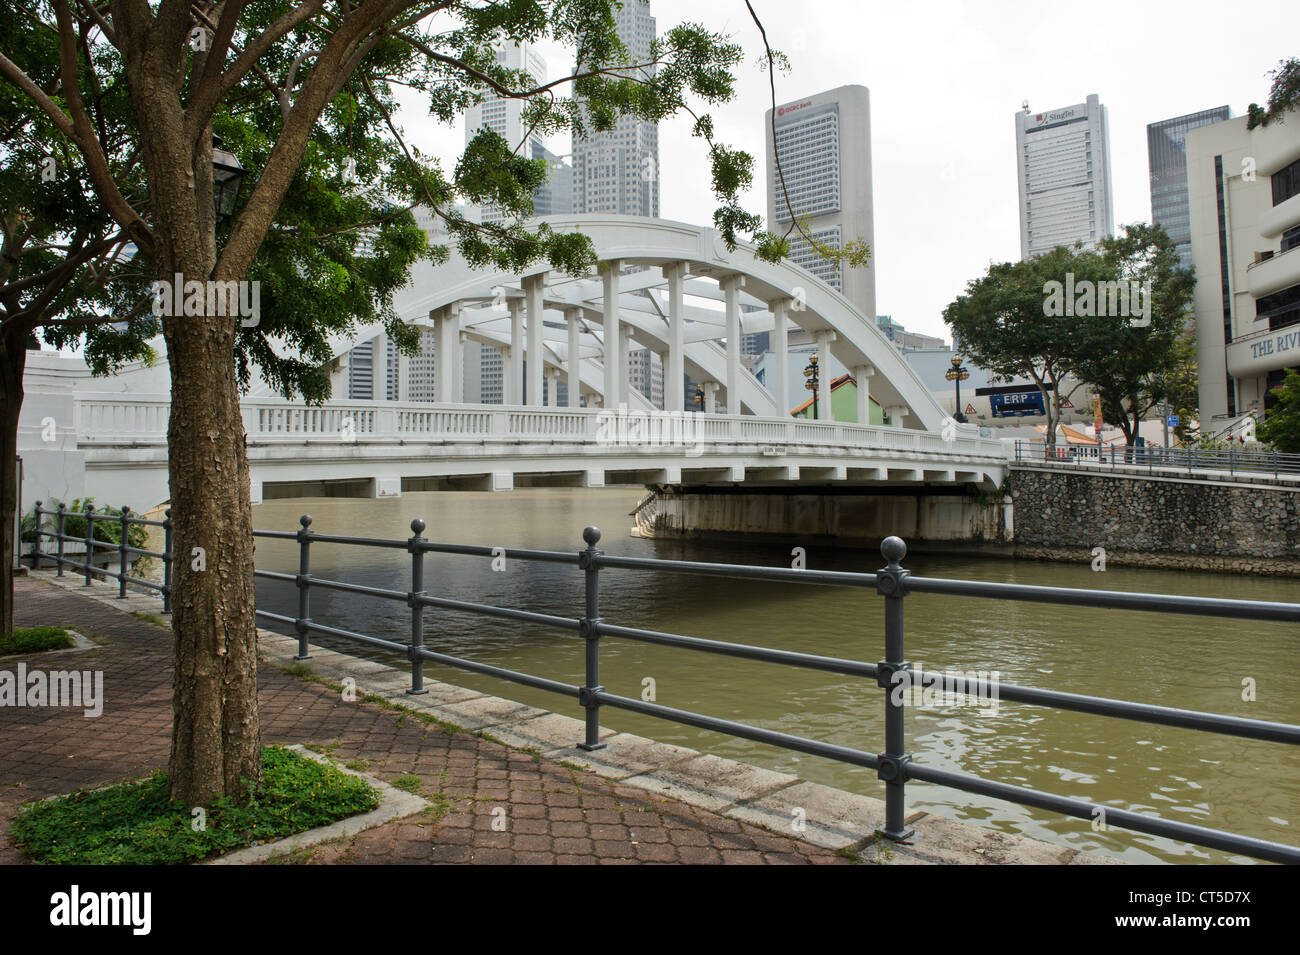 Elgin Bridge in front of the skyline of the financial district, Singapore, Southeast Asia. Stock Photo